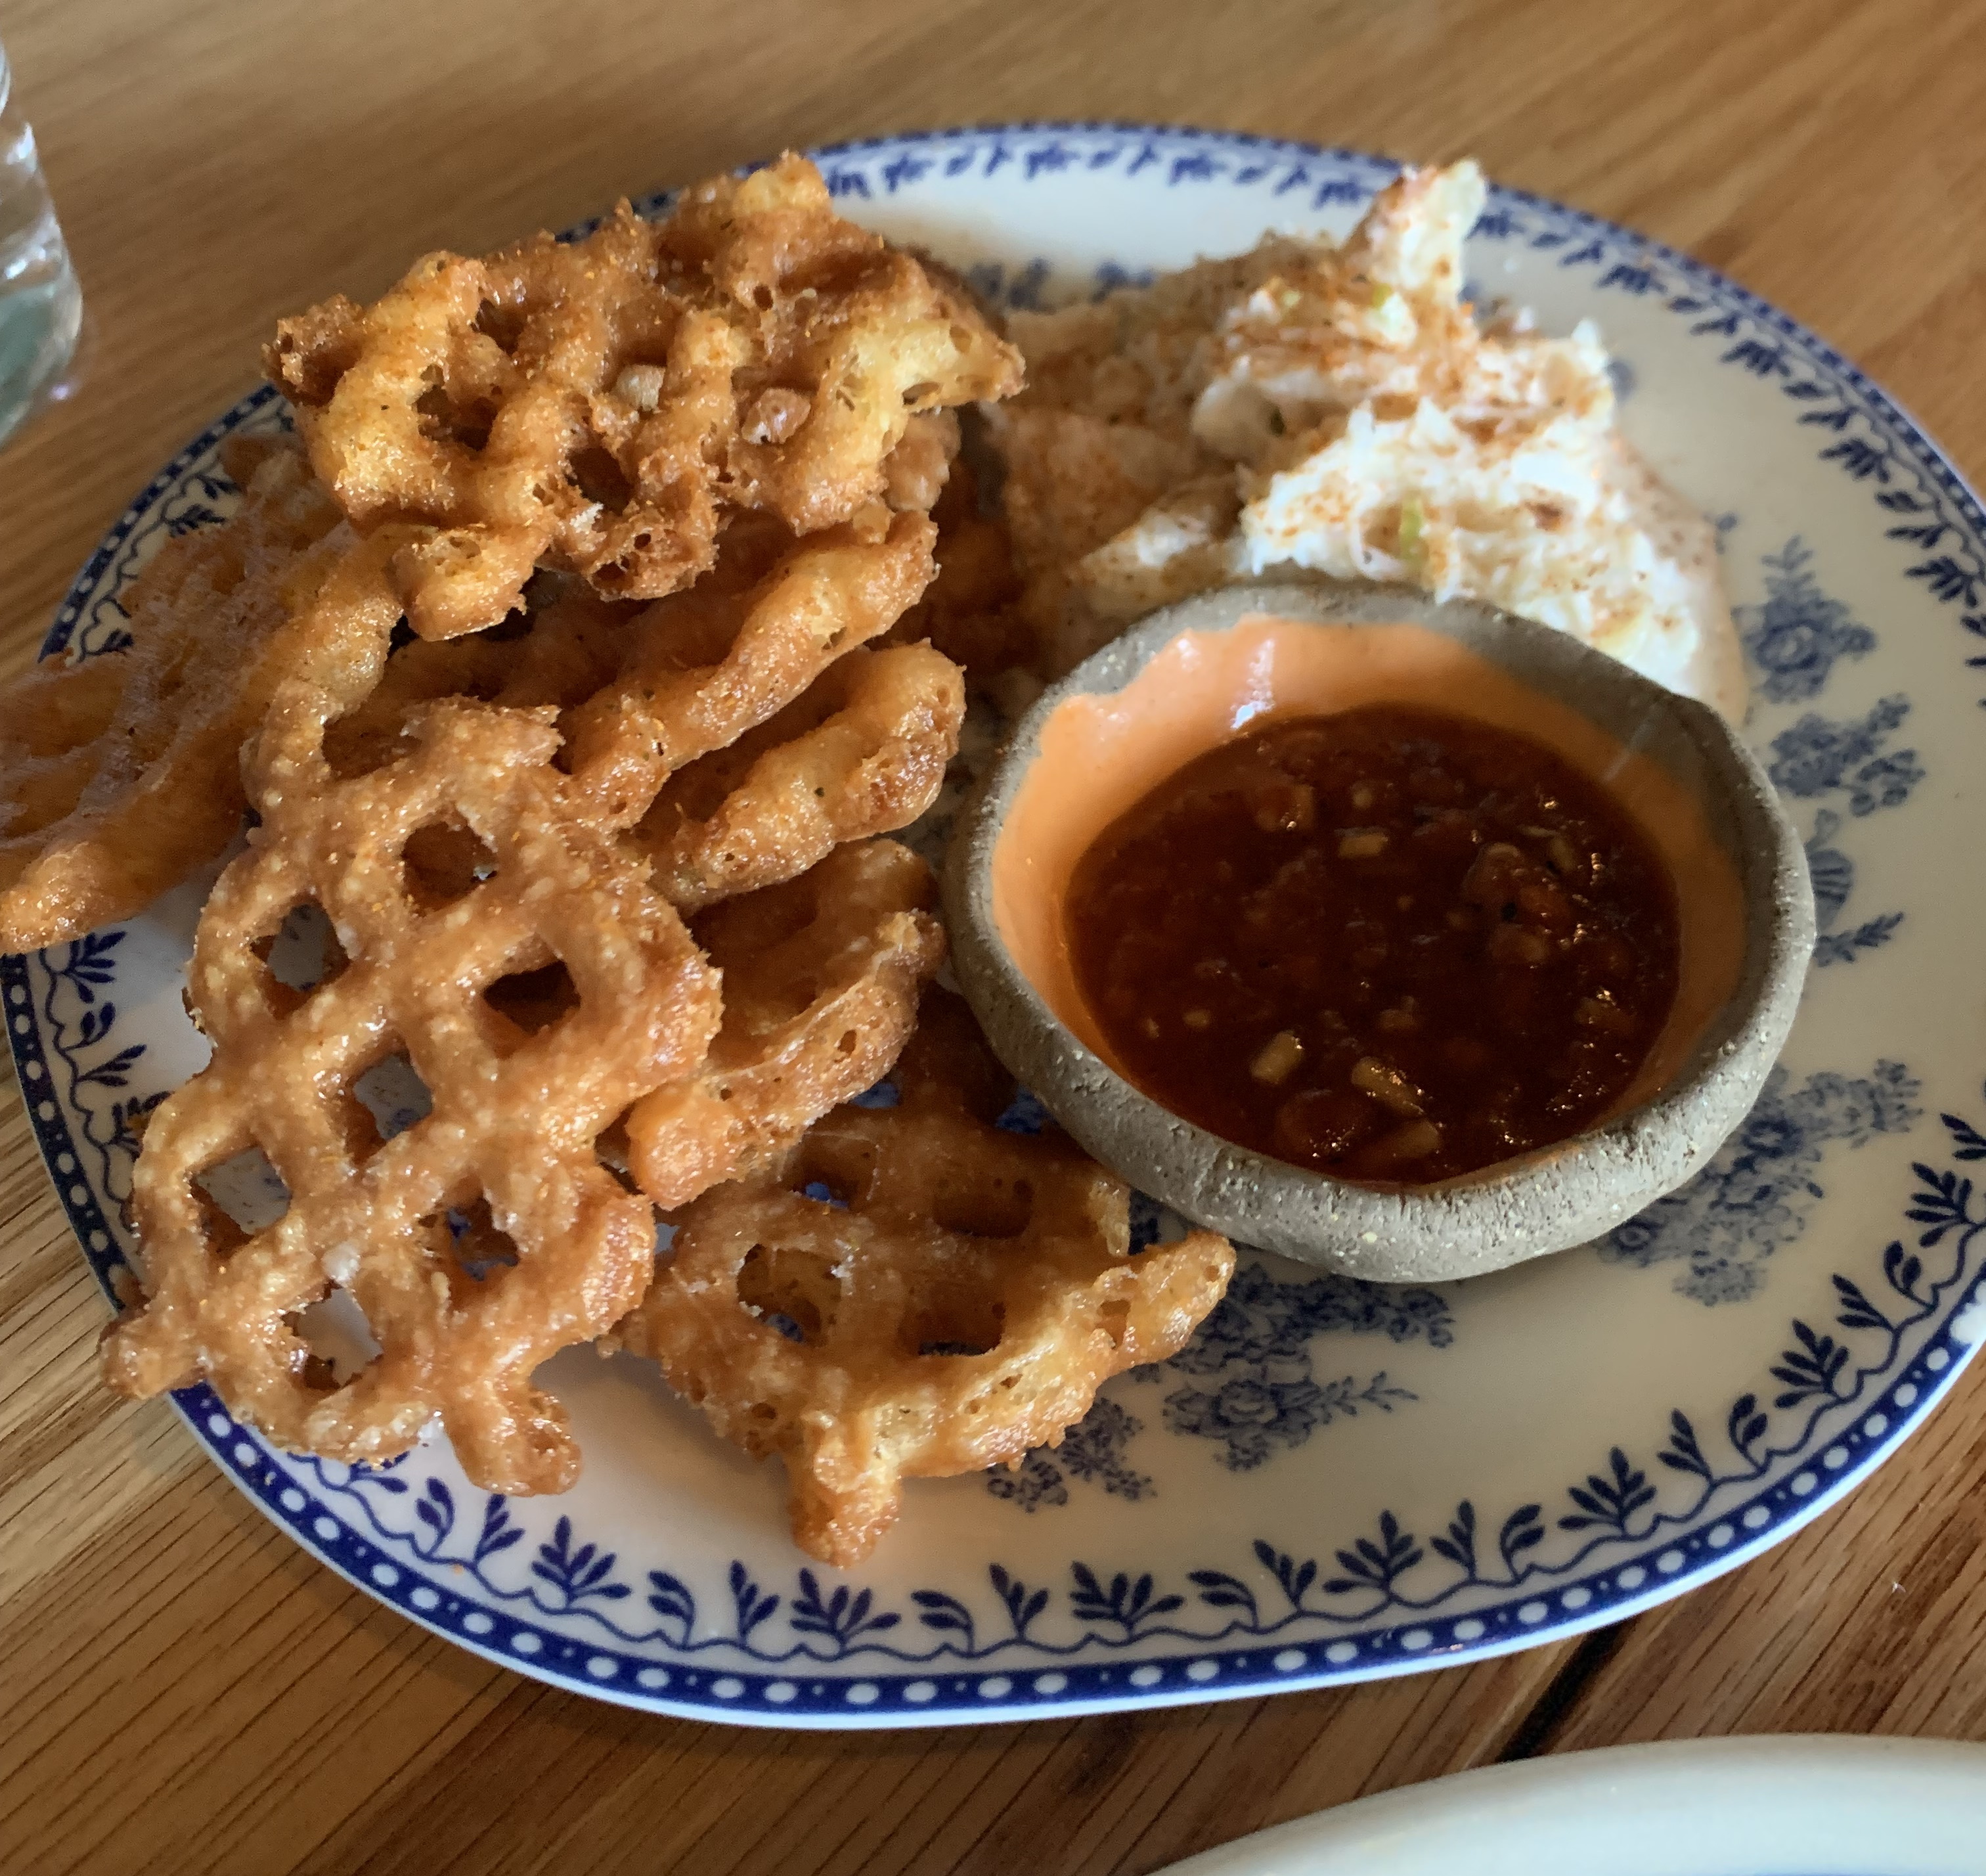 Big waffle fries with a very consistent shape served next to a crab salad and a small bowl of deep red cocktail sauce